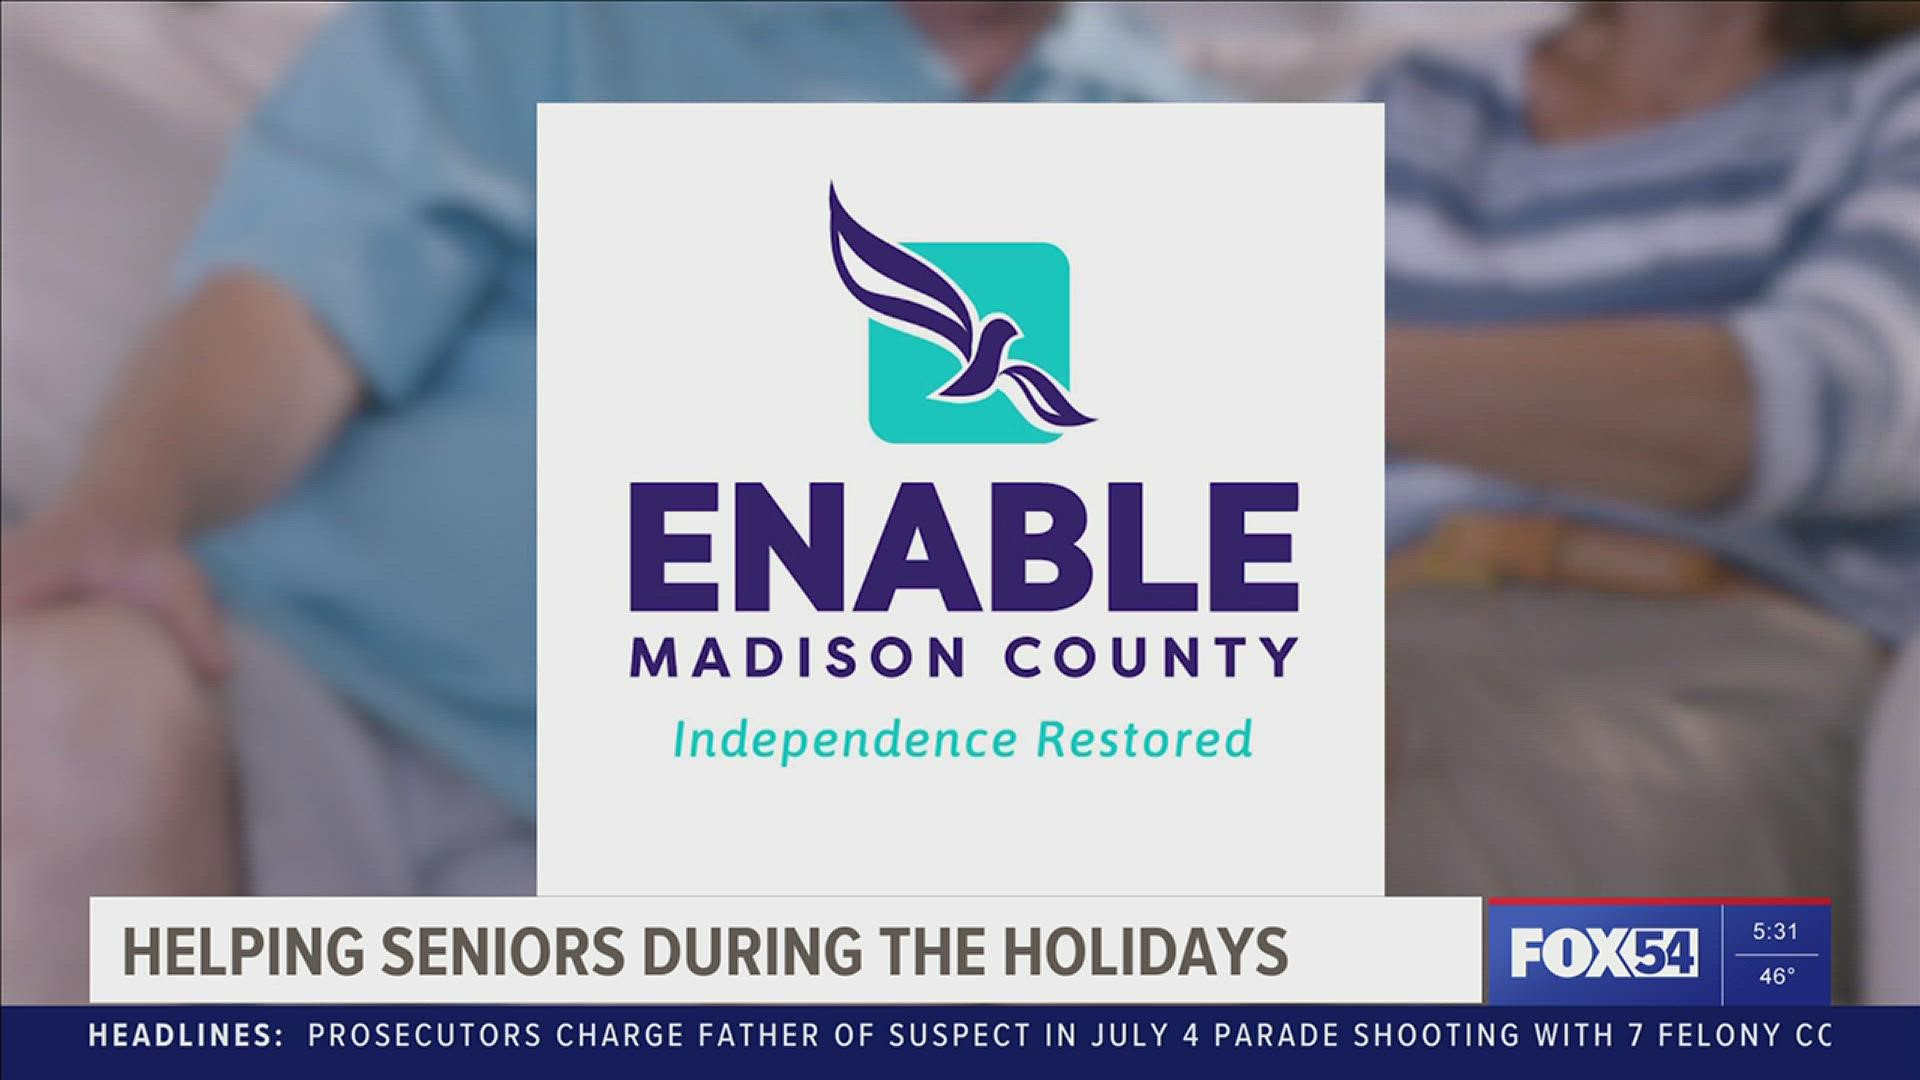 The holiday season is a time of celebration and happiness. For many seniors, however, it can be difficult to stay positive and happy during this time.